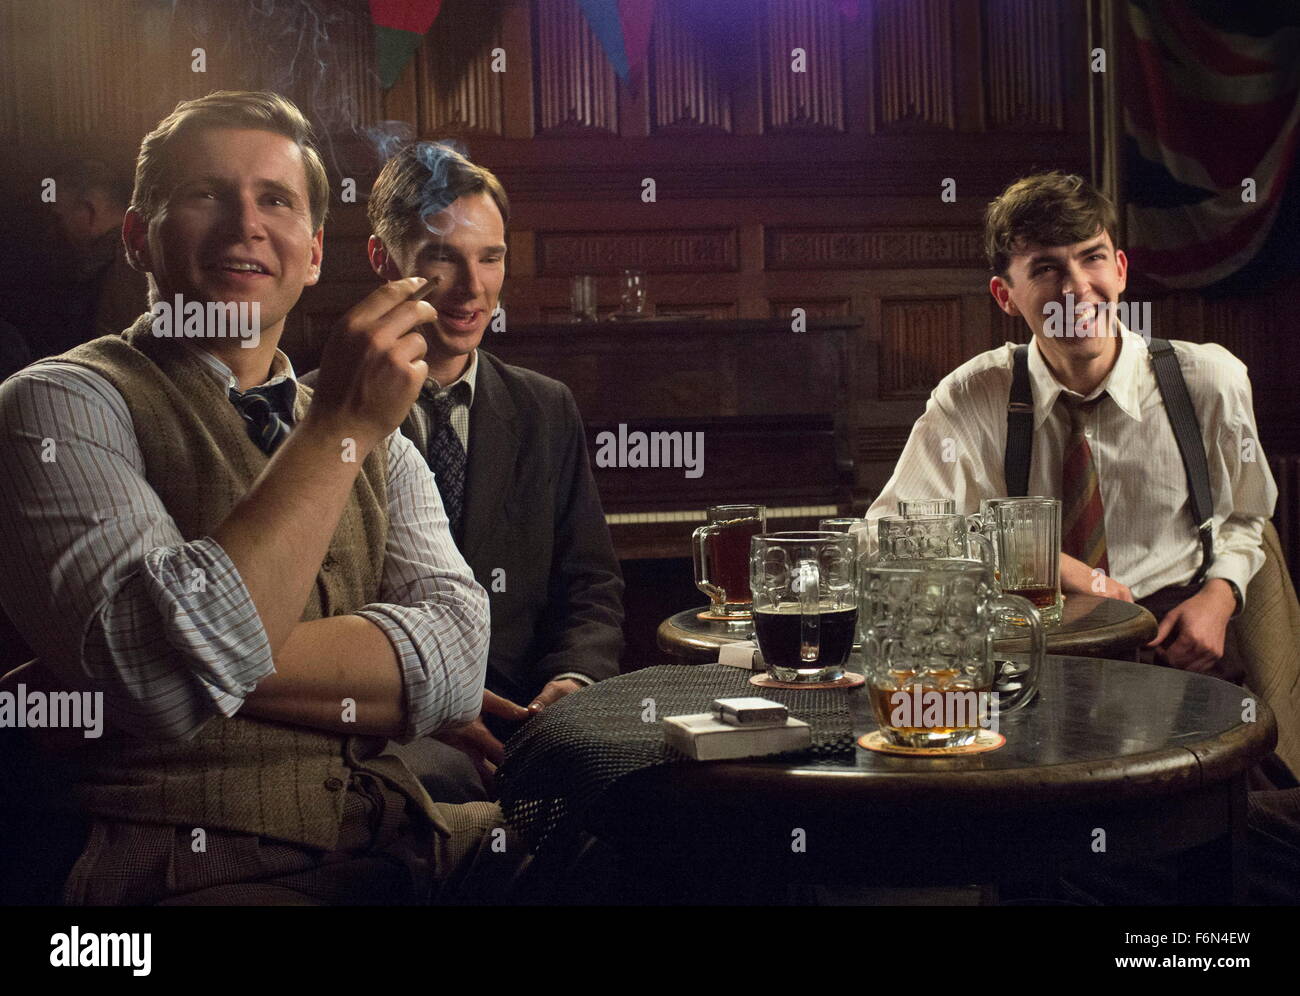 Jan 15, 2015 - Academy Award Best Picture Nomination - The Imitation Game- PICTURED: (L-R) ALLEN LEECH as John Cairncross, BENEDICT CUMBERBATCH as Alan Turing and MATTHEW BEARD as Peter Hilton. (Credit: c The Weinstein Company/Entertainment Pictures) Stock Photo